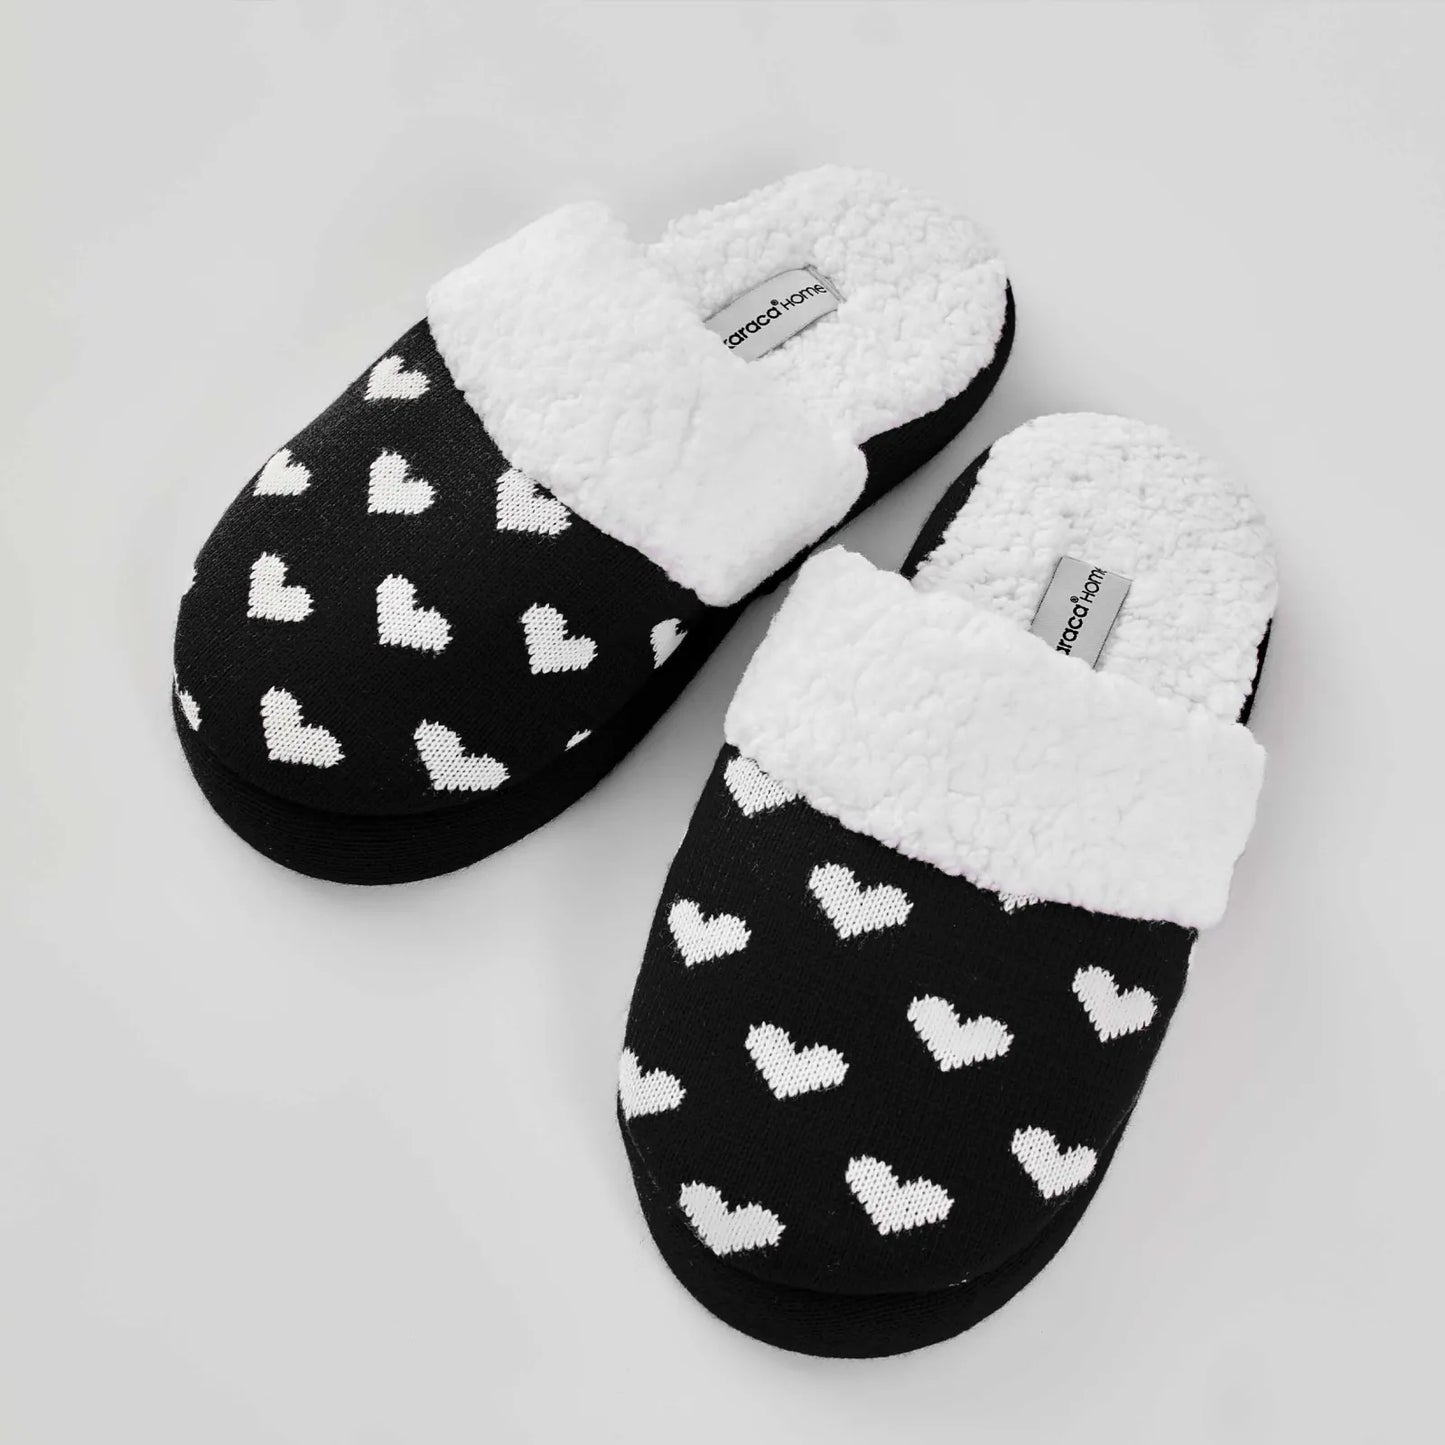 Home Slippers - Comfortable and Cozy Footwear for Indoor Relaxation